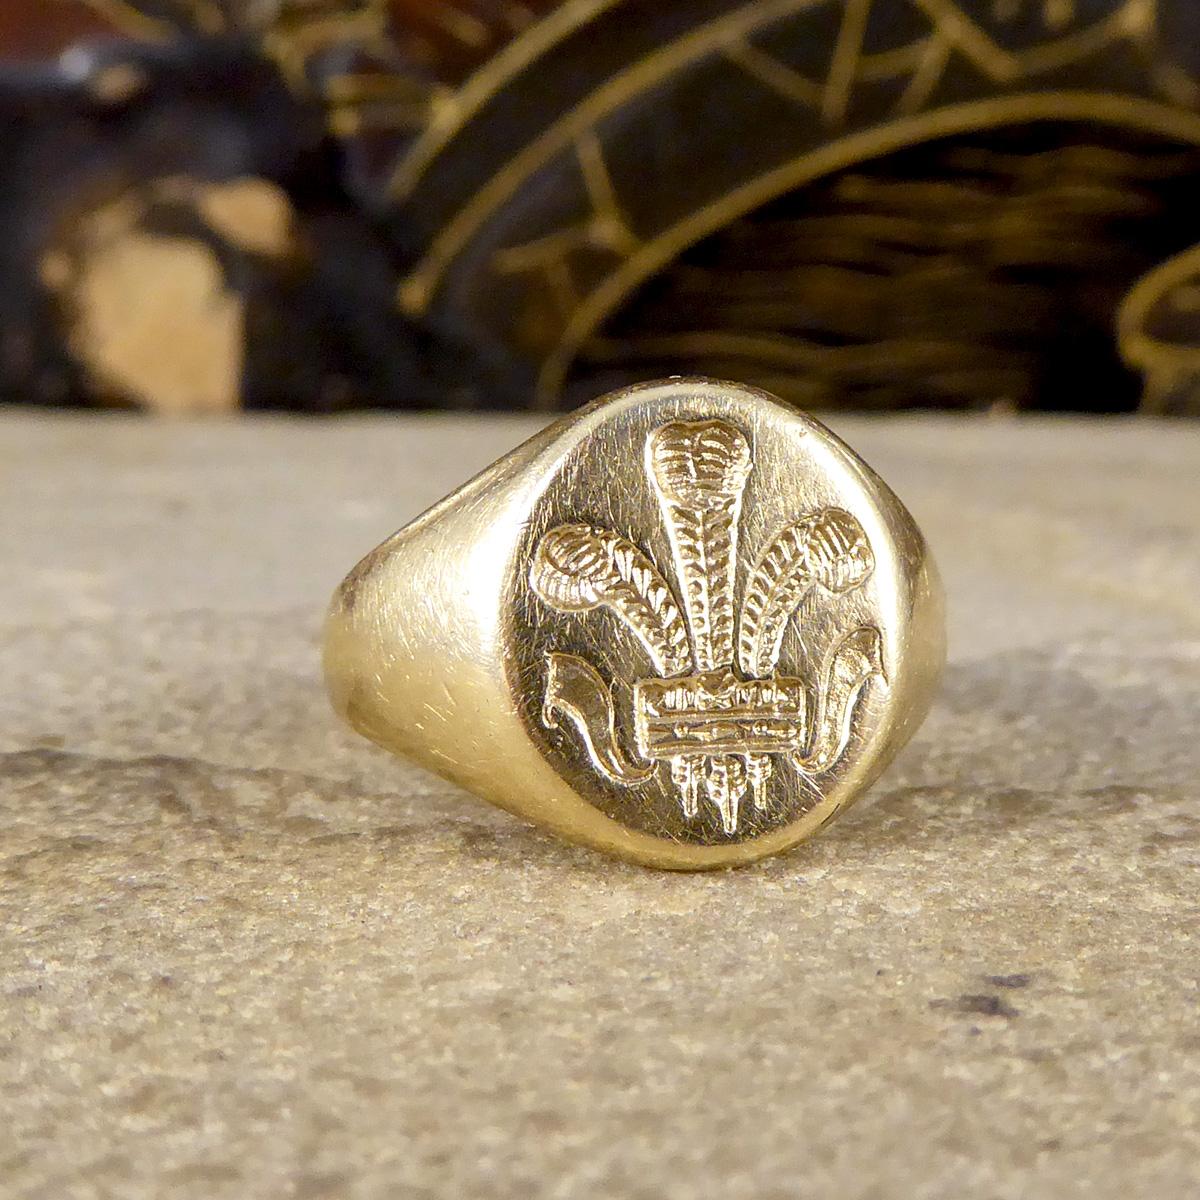 This vintage ring it typically worn by men as a gents signet but can also be worn my women as a unisex piece. It has such a quality feel and usually worn on the pinky finger. This signet ring features a Prince of Wales Feathers crest seal on the